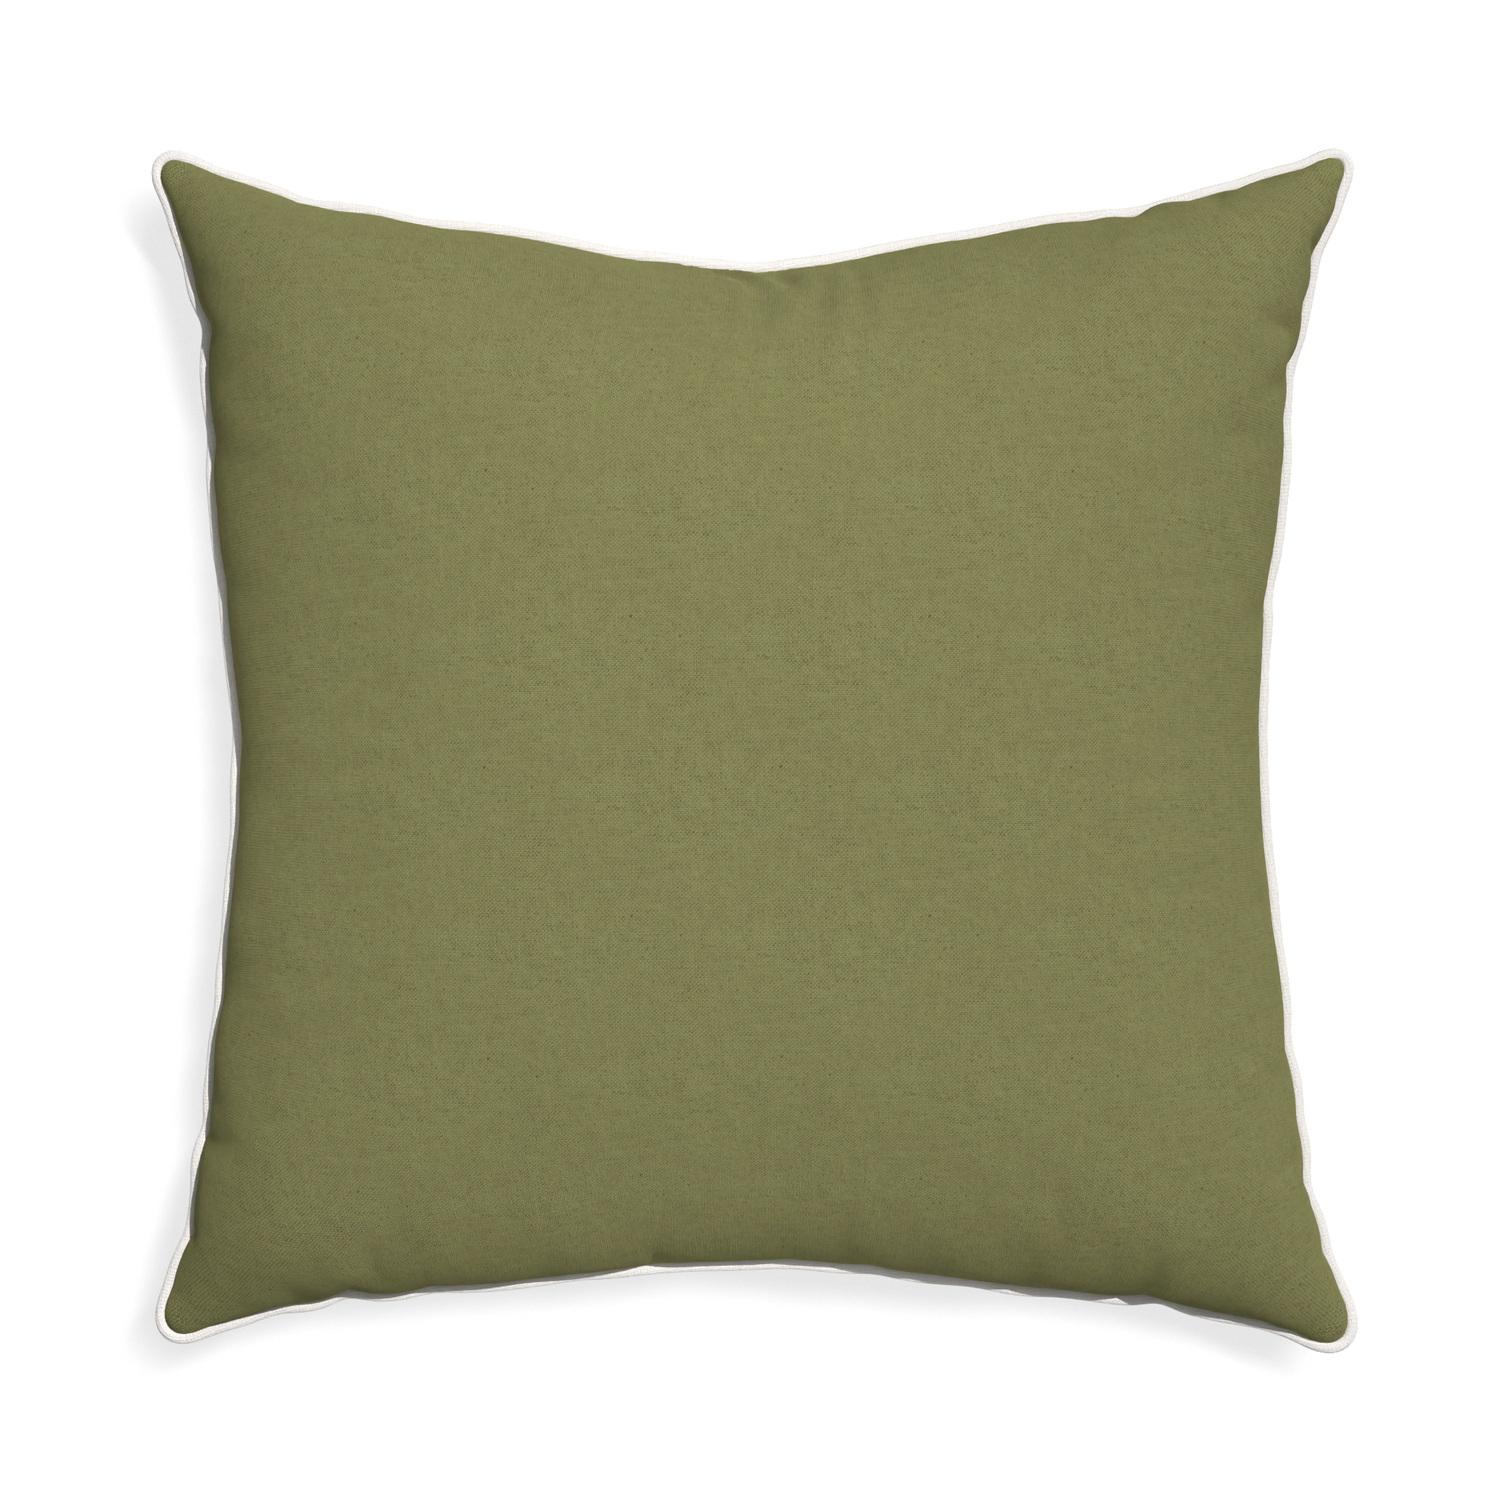 Euro-sham moss custom moss greenpillow with snow piping on white background